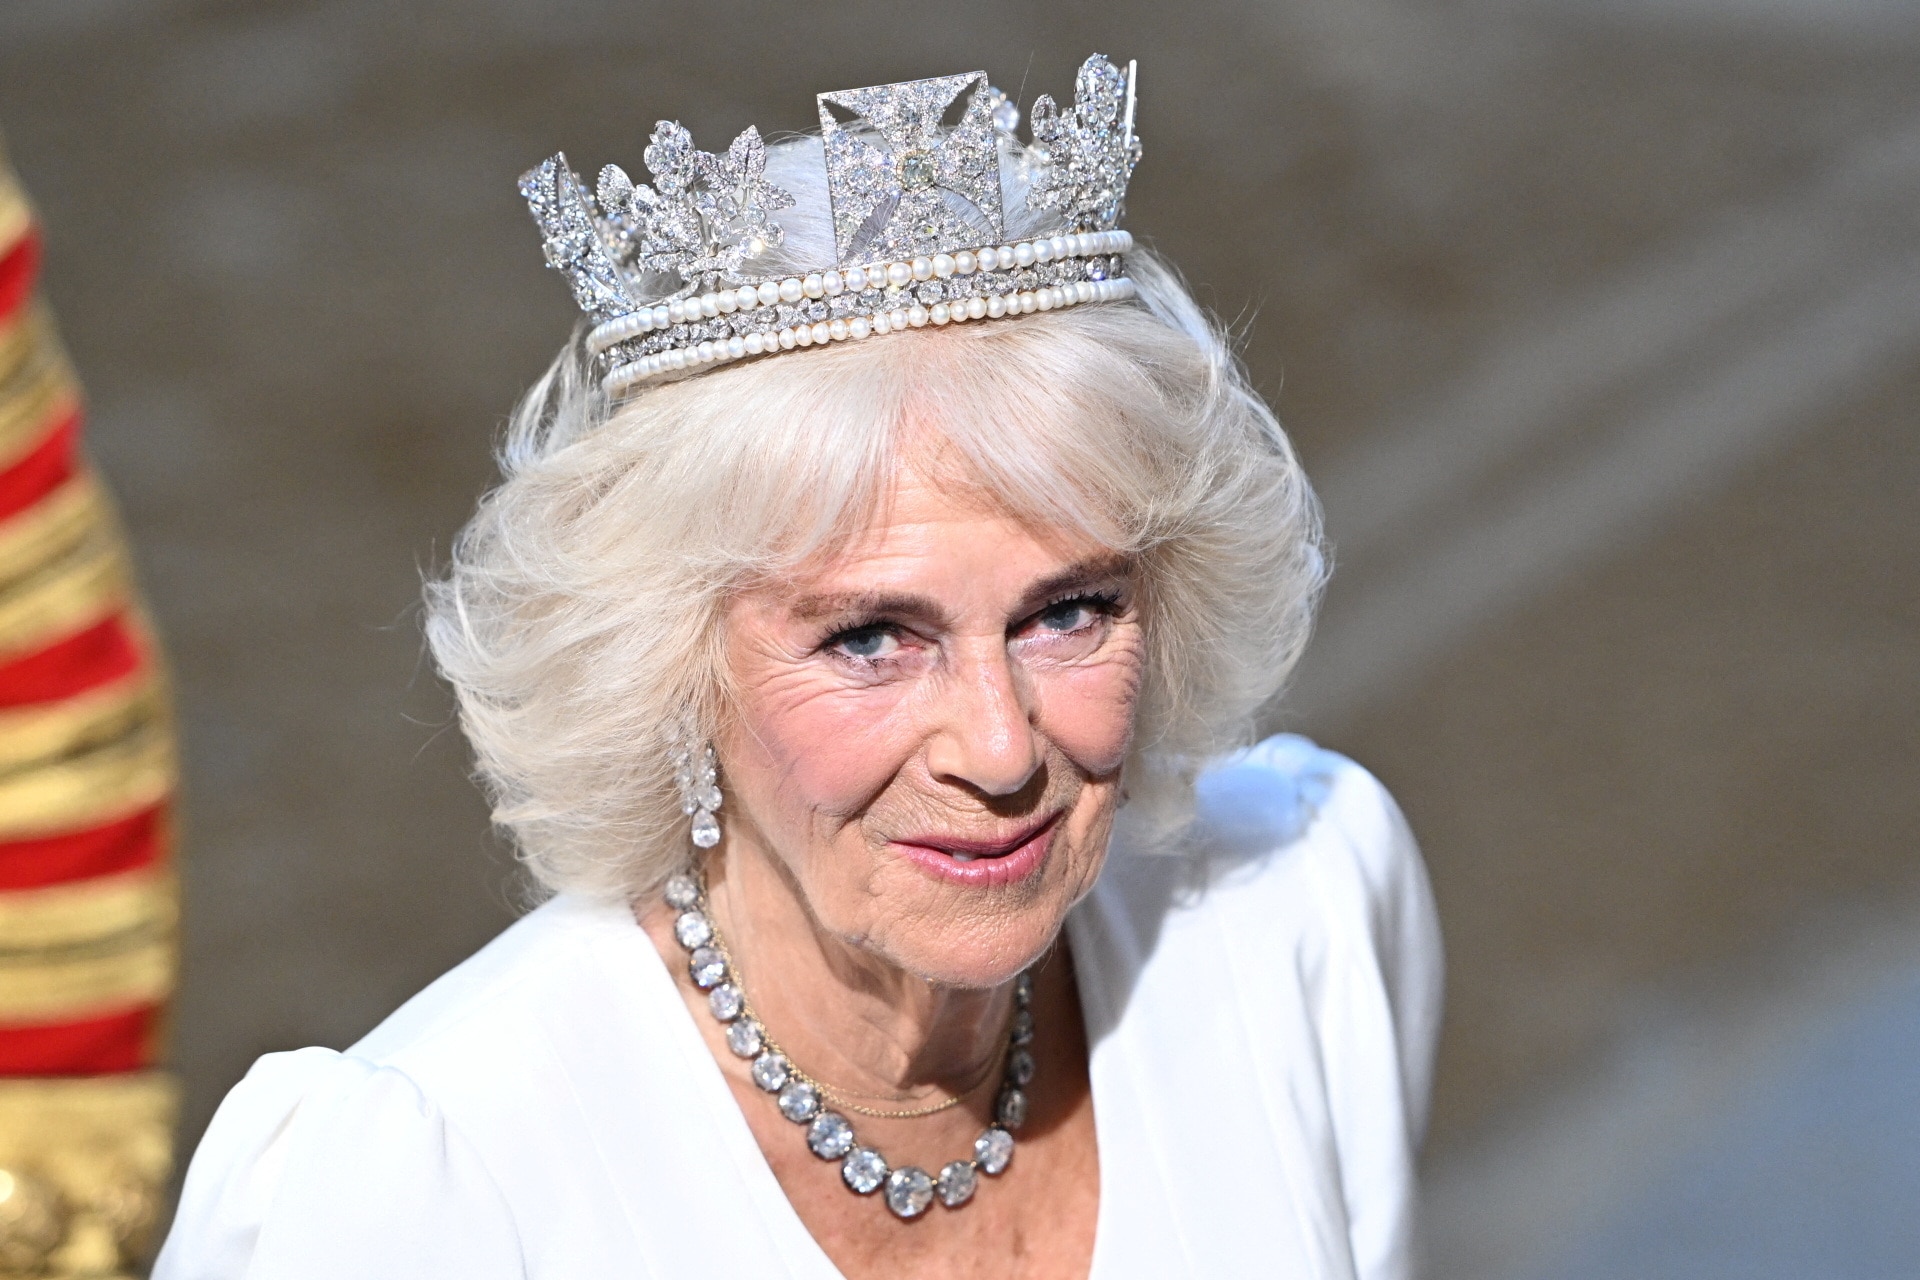 Queen Camilla wearing a jewel crown and jewel necklace in a white dress